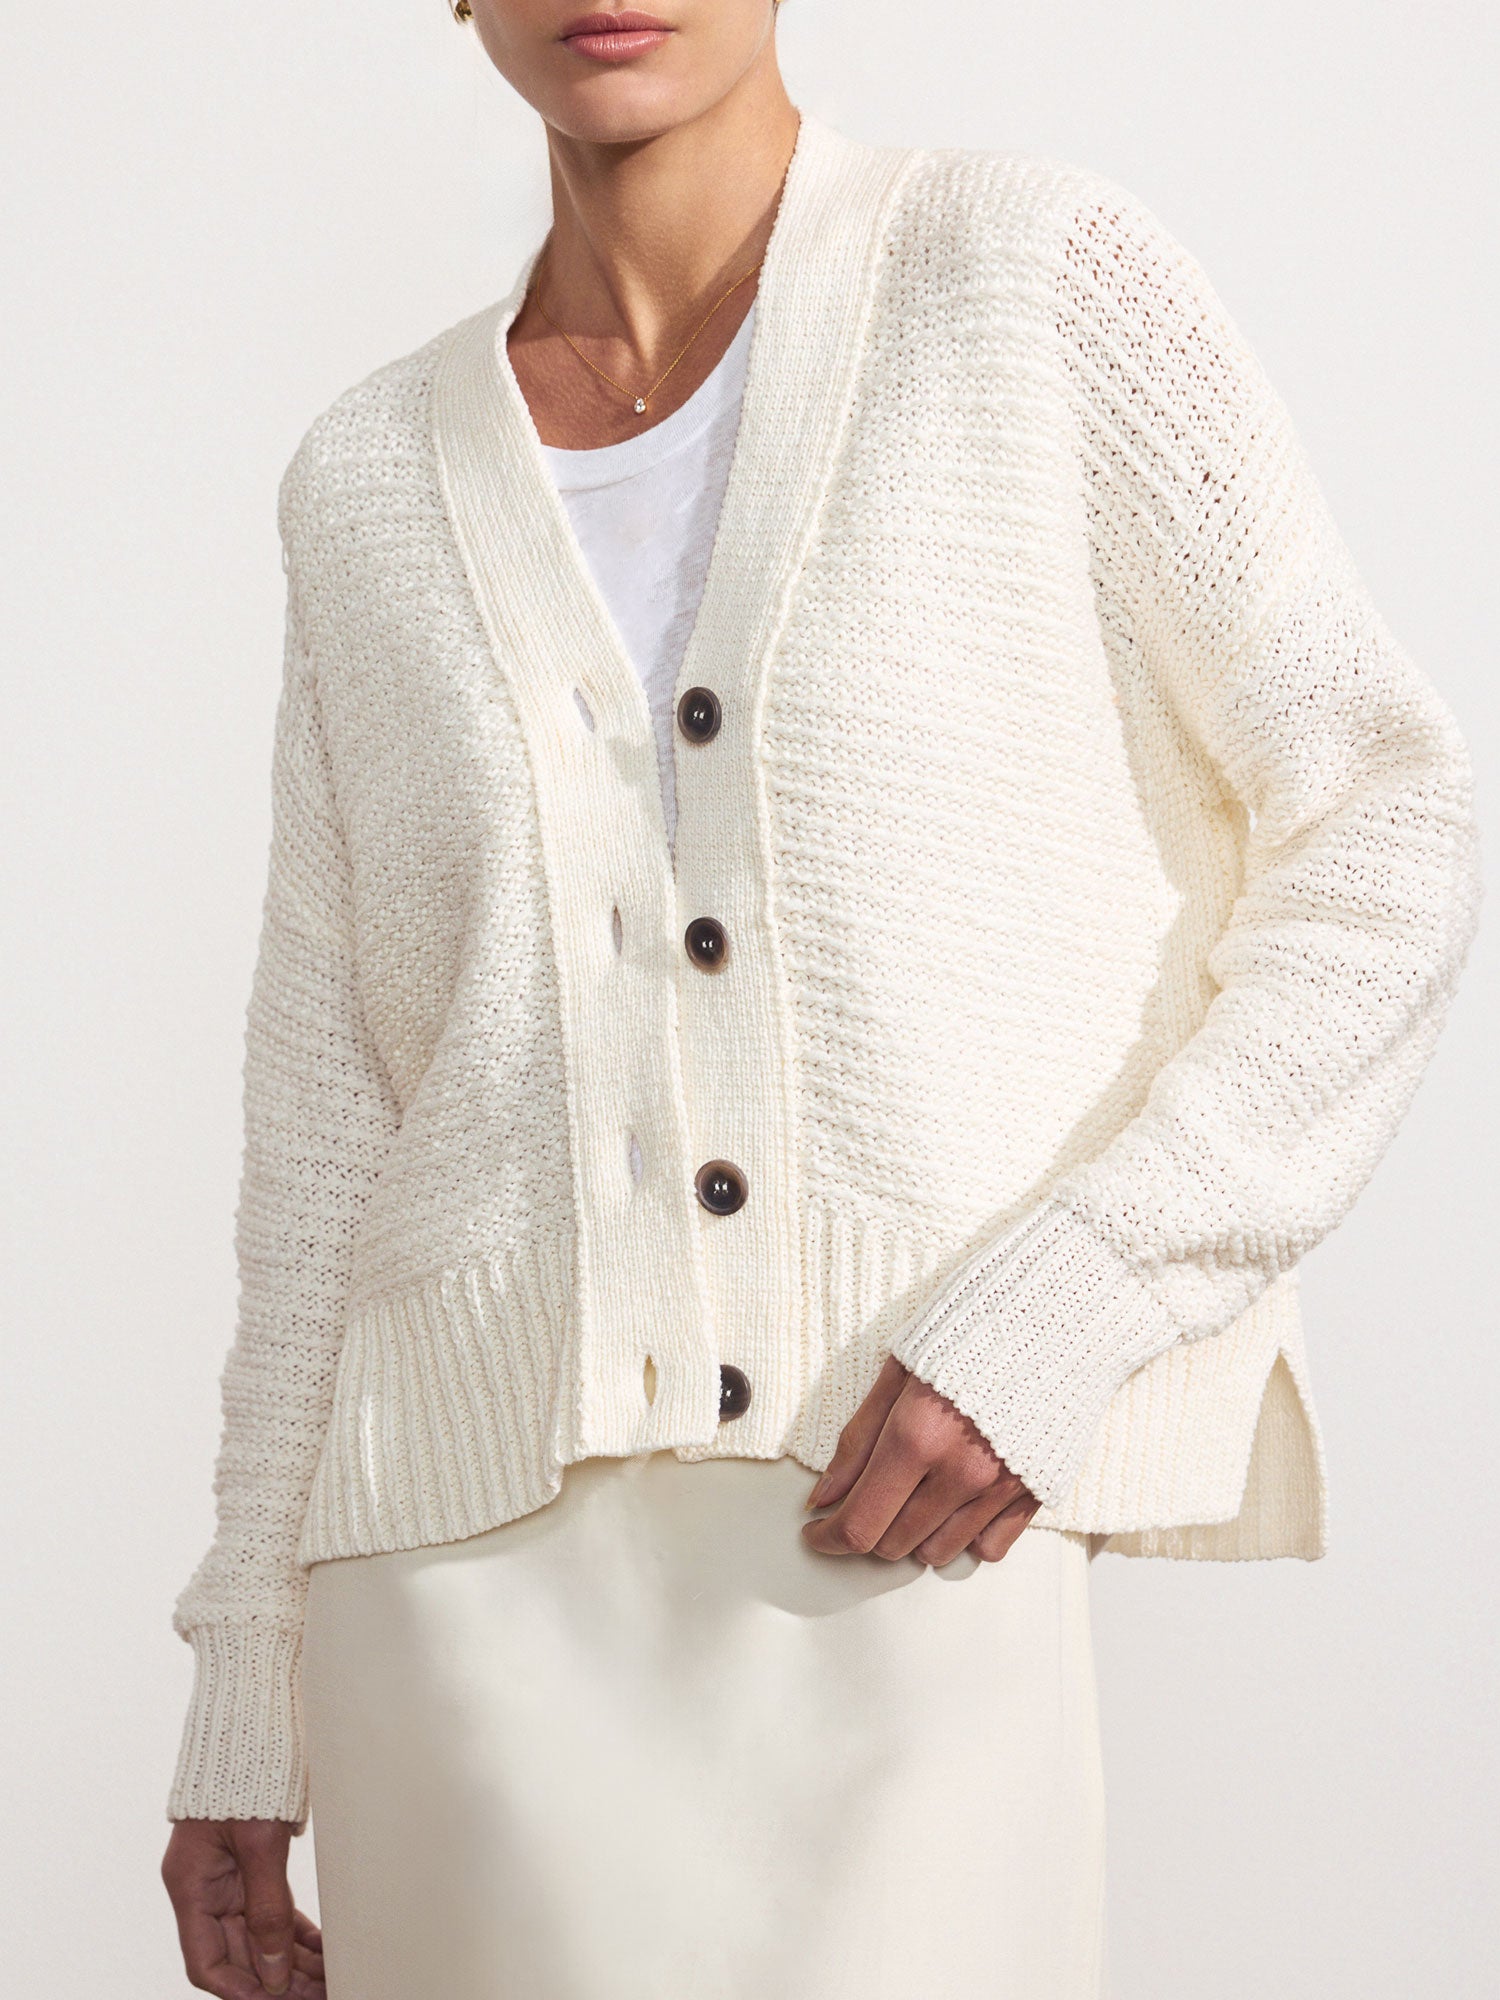 Brochu Walker Cardigans: Cropped, Cashmere, Pre-Layered, More